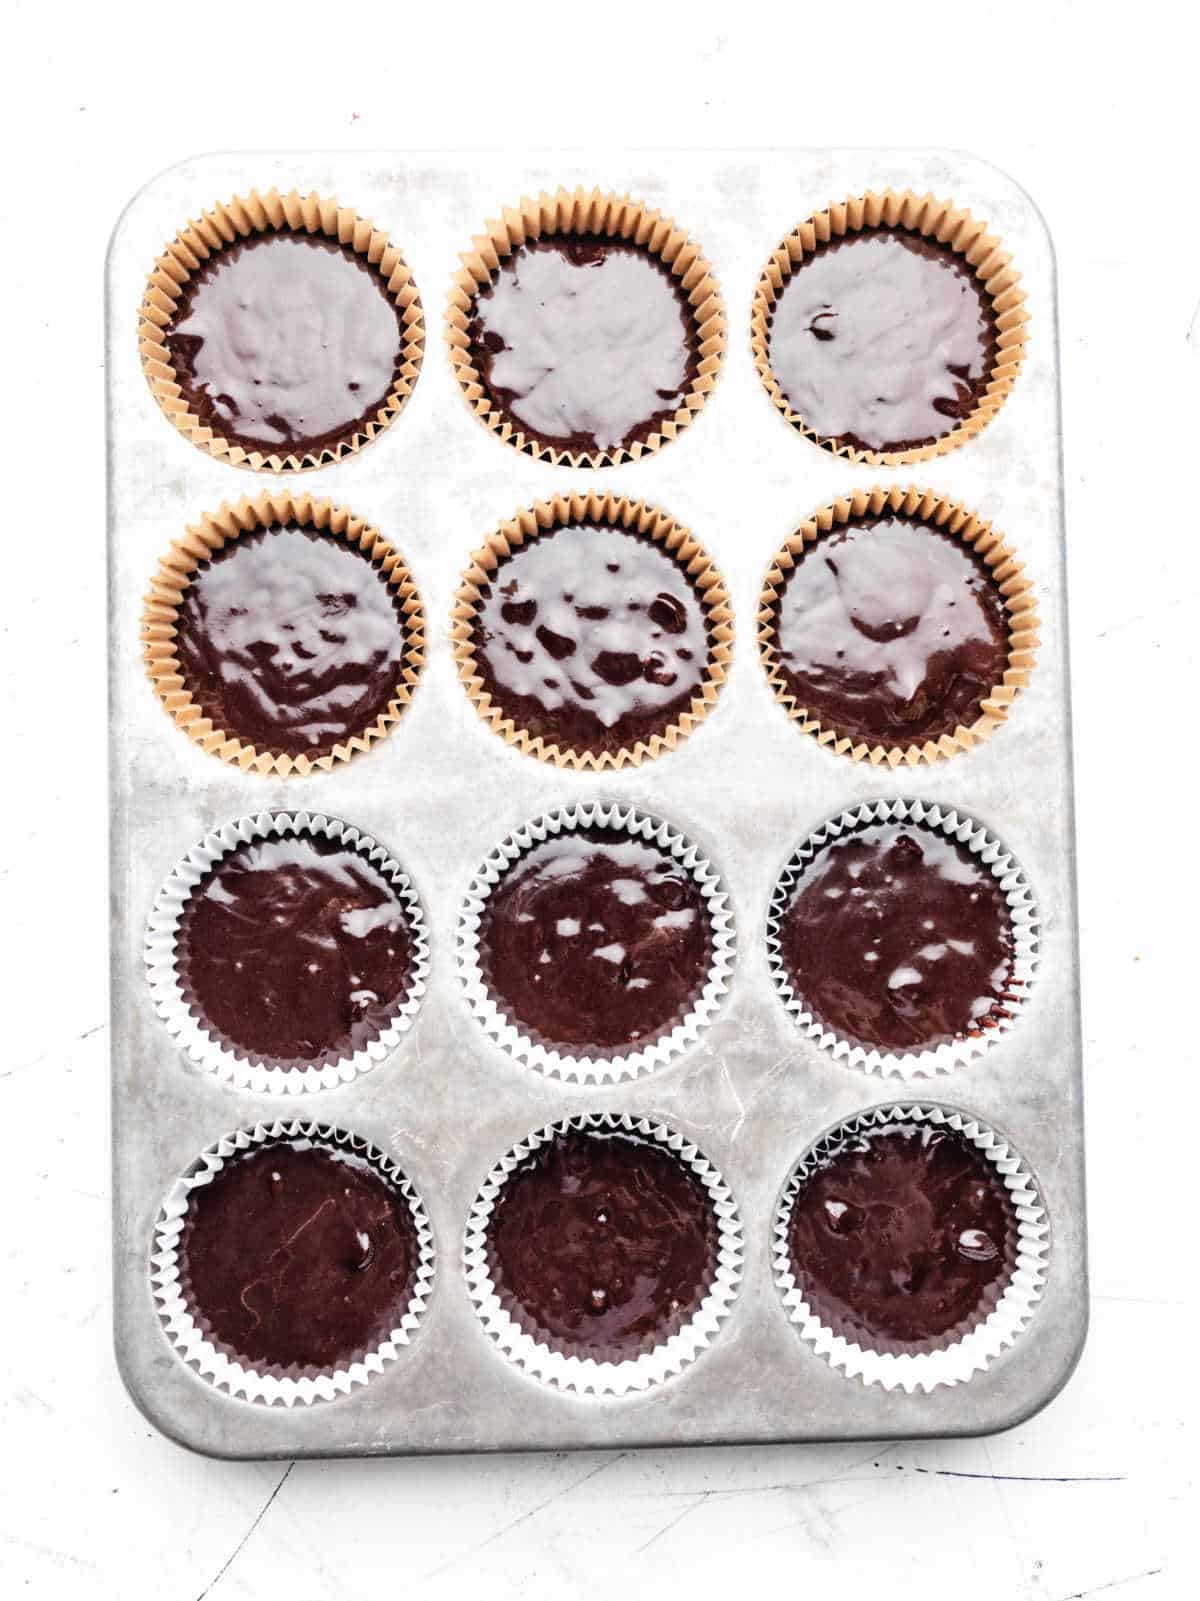 Double chocolate muffin batter in a muffin tin. 